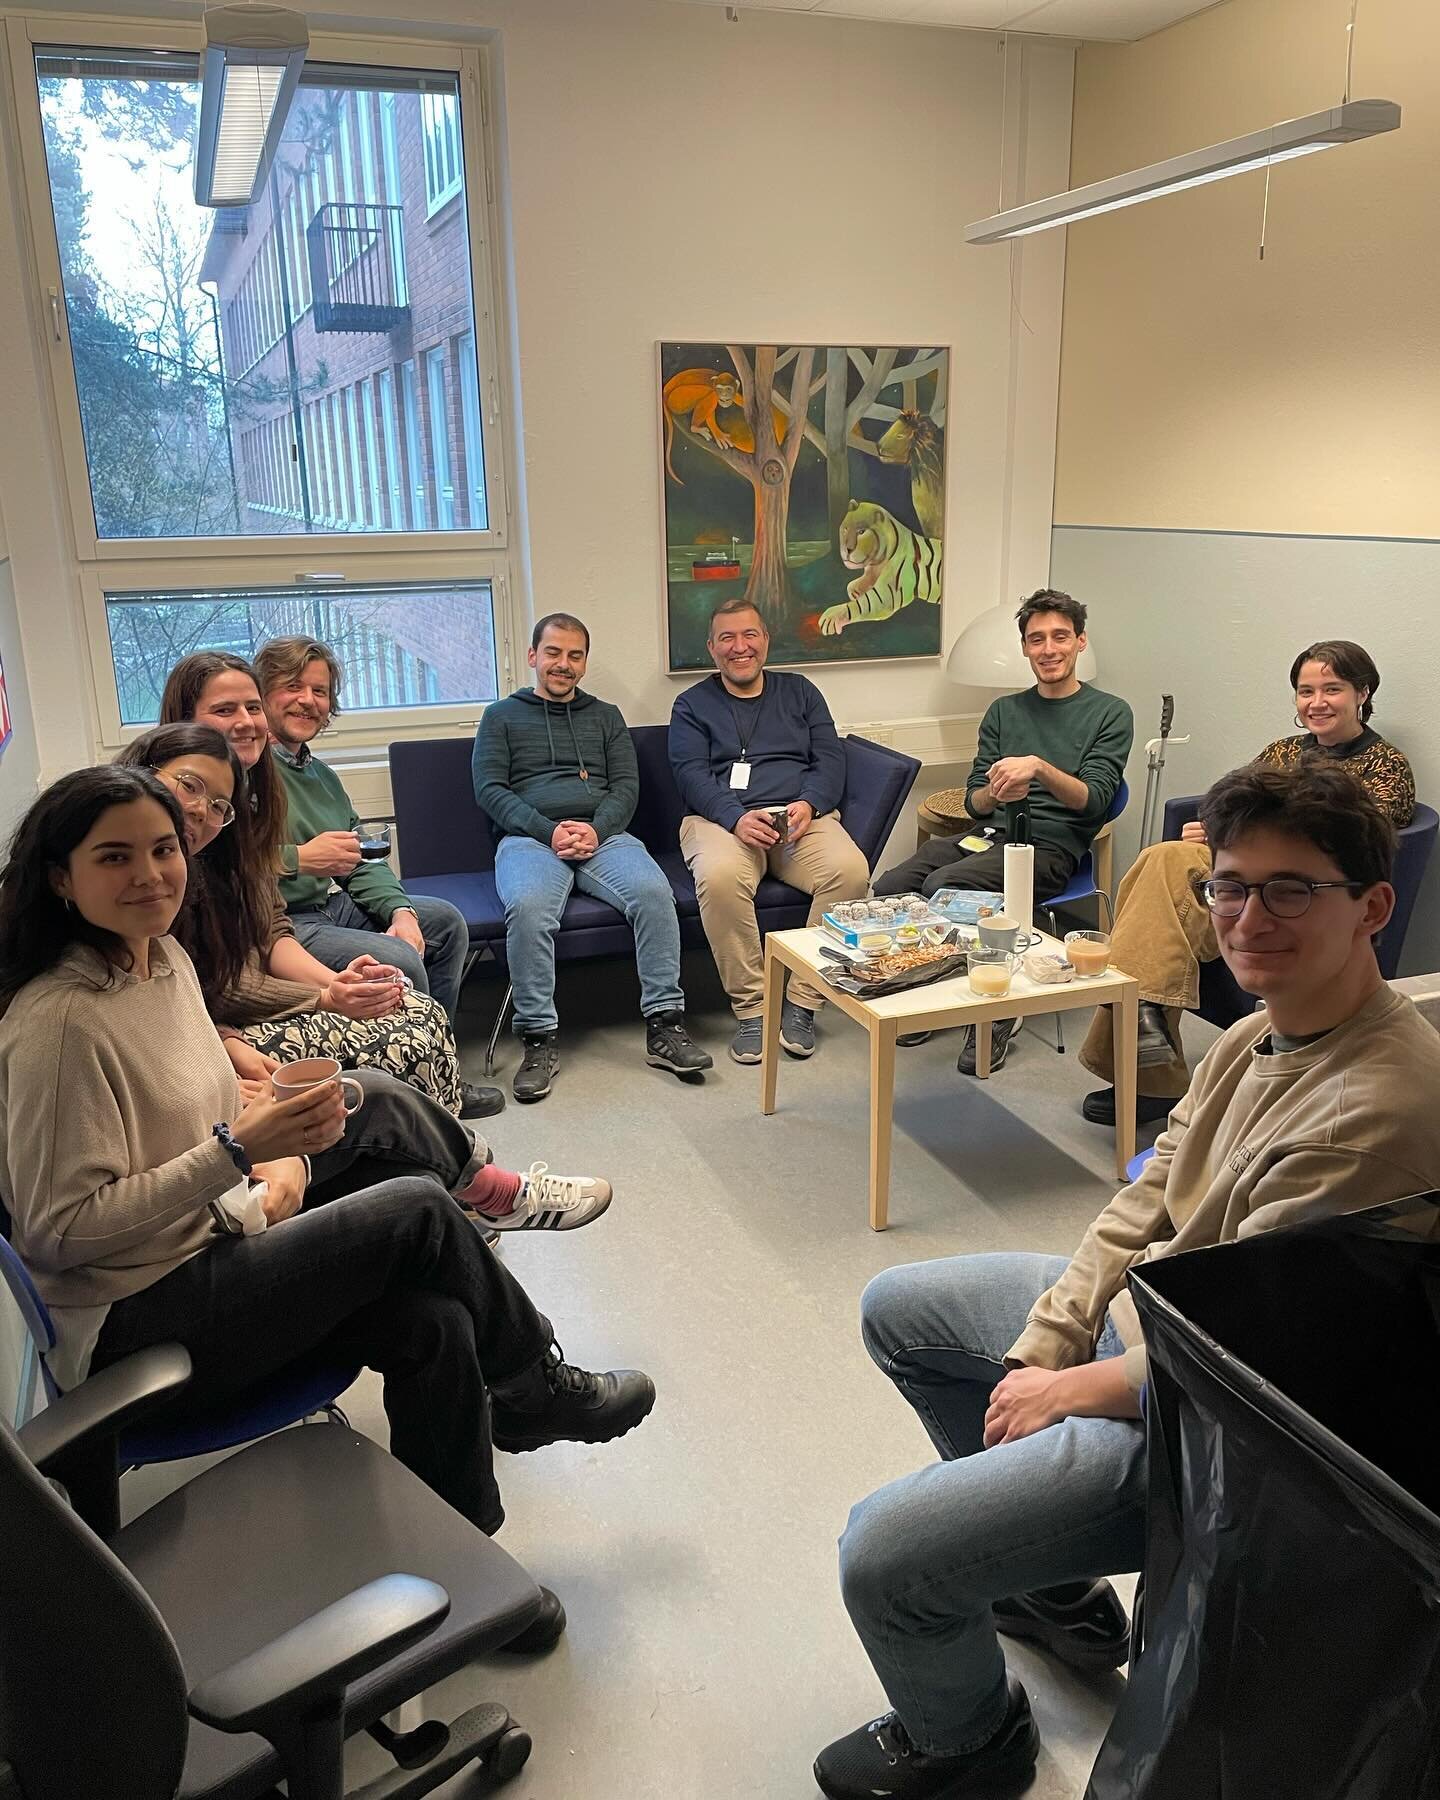 Swedish #fika introducing new visiting researchers to the #brainandmind community ☕️🍪